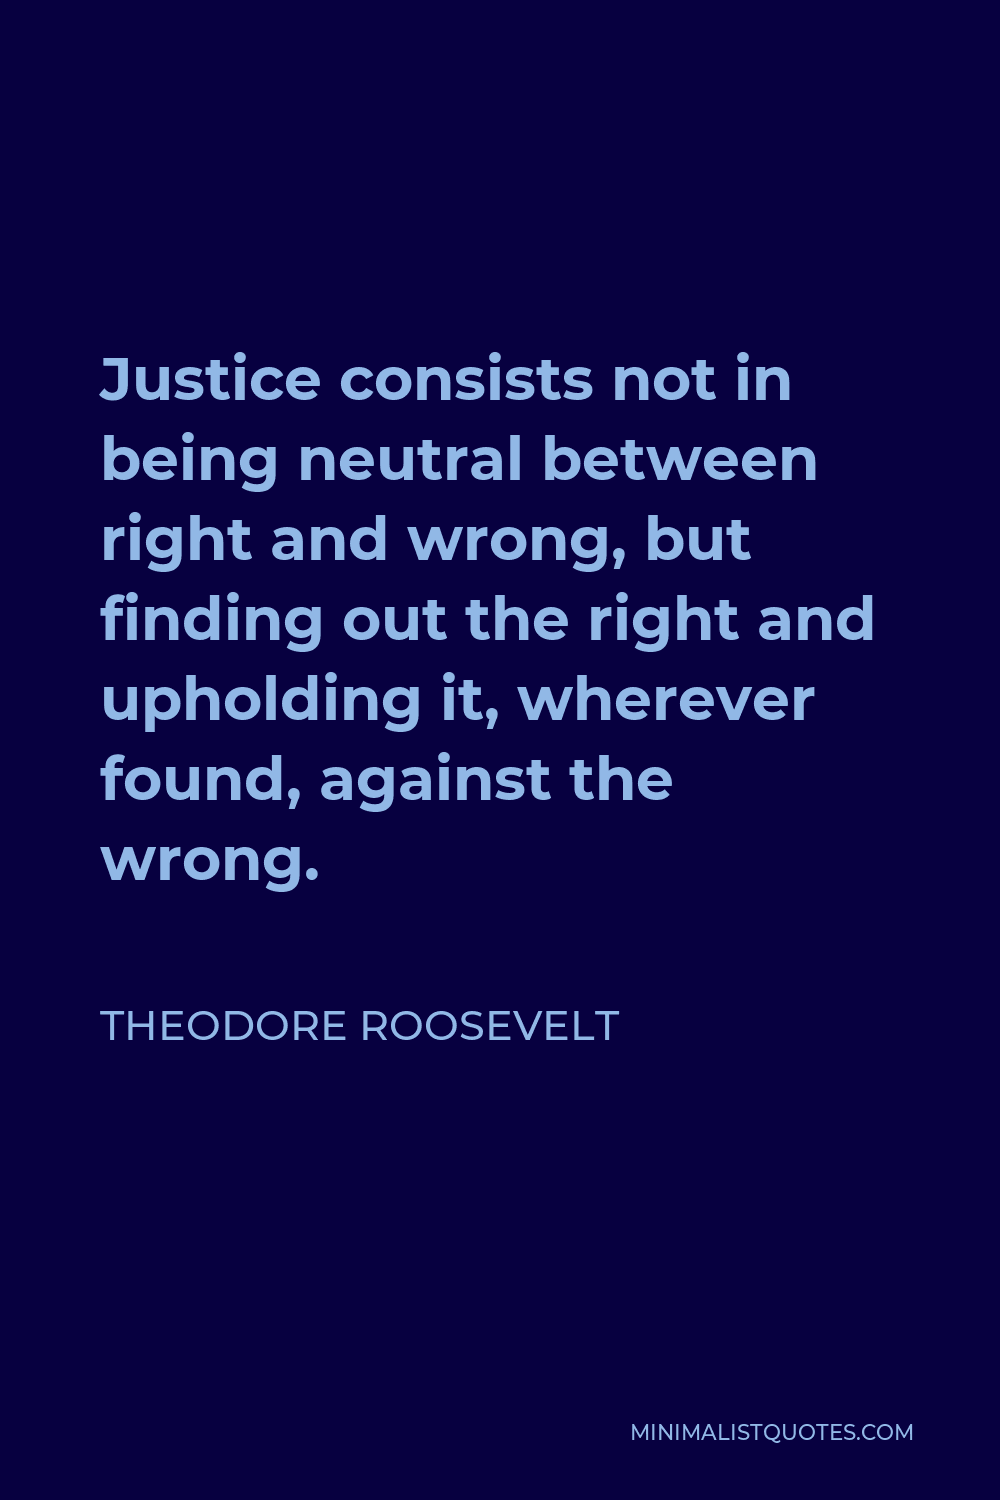 Theodore Roosevelt Quote - Justice consists not in being neutral between right and wrong, but finding out the right and upholding it, wherever found, against the wrong.